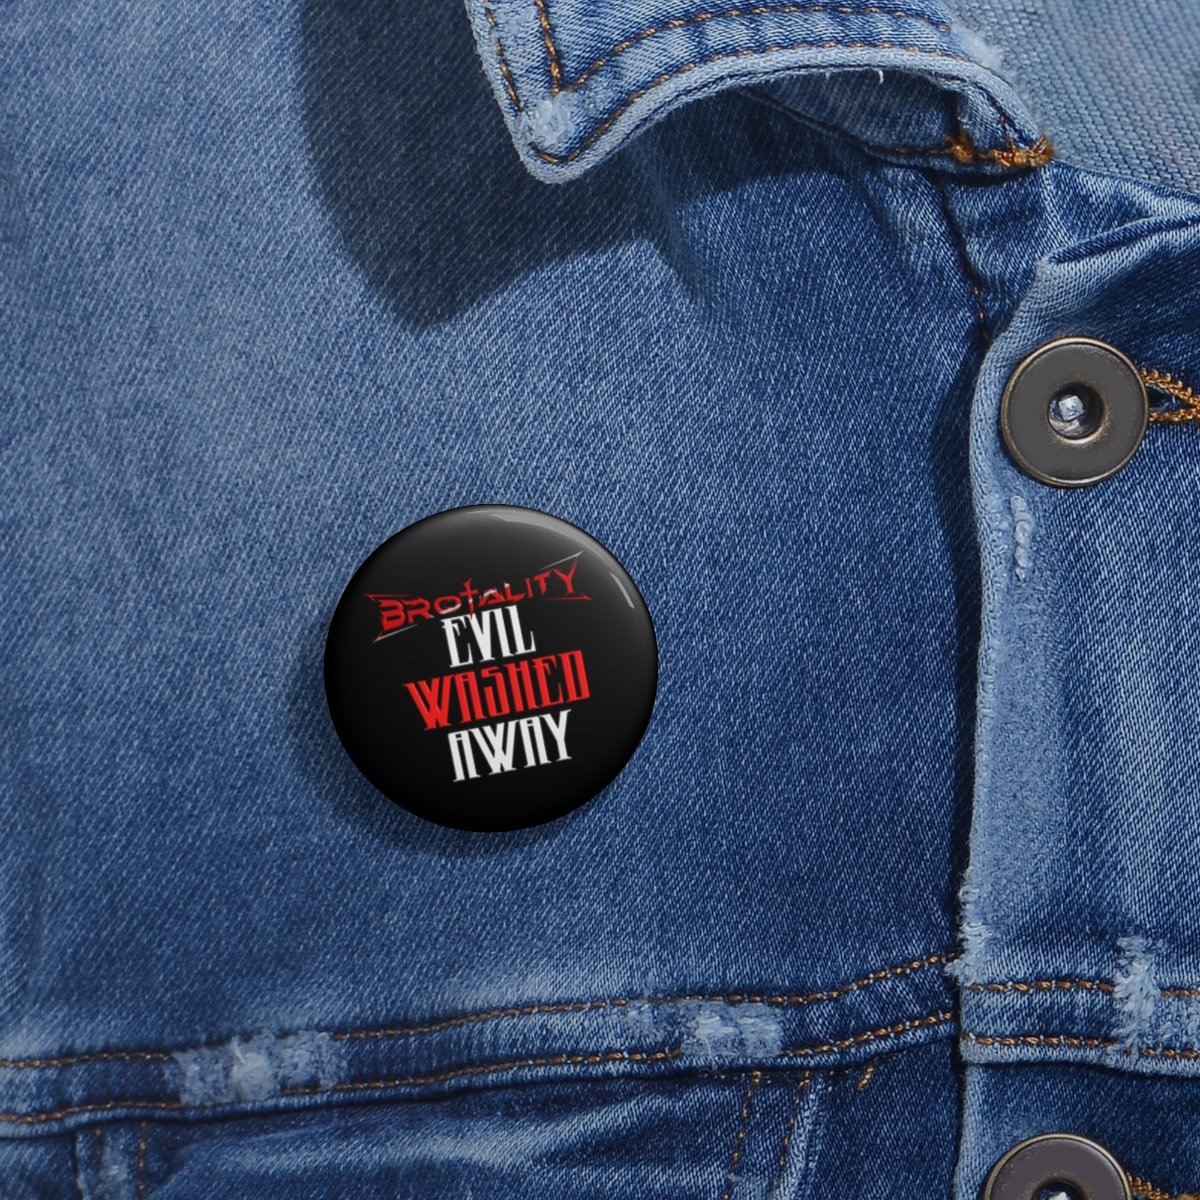 Brotality Evil Washed Away Pin Buttons